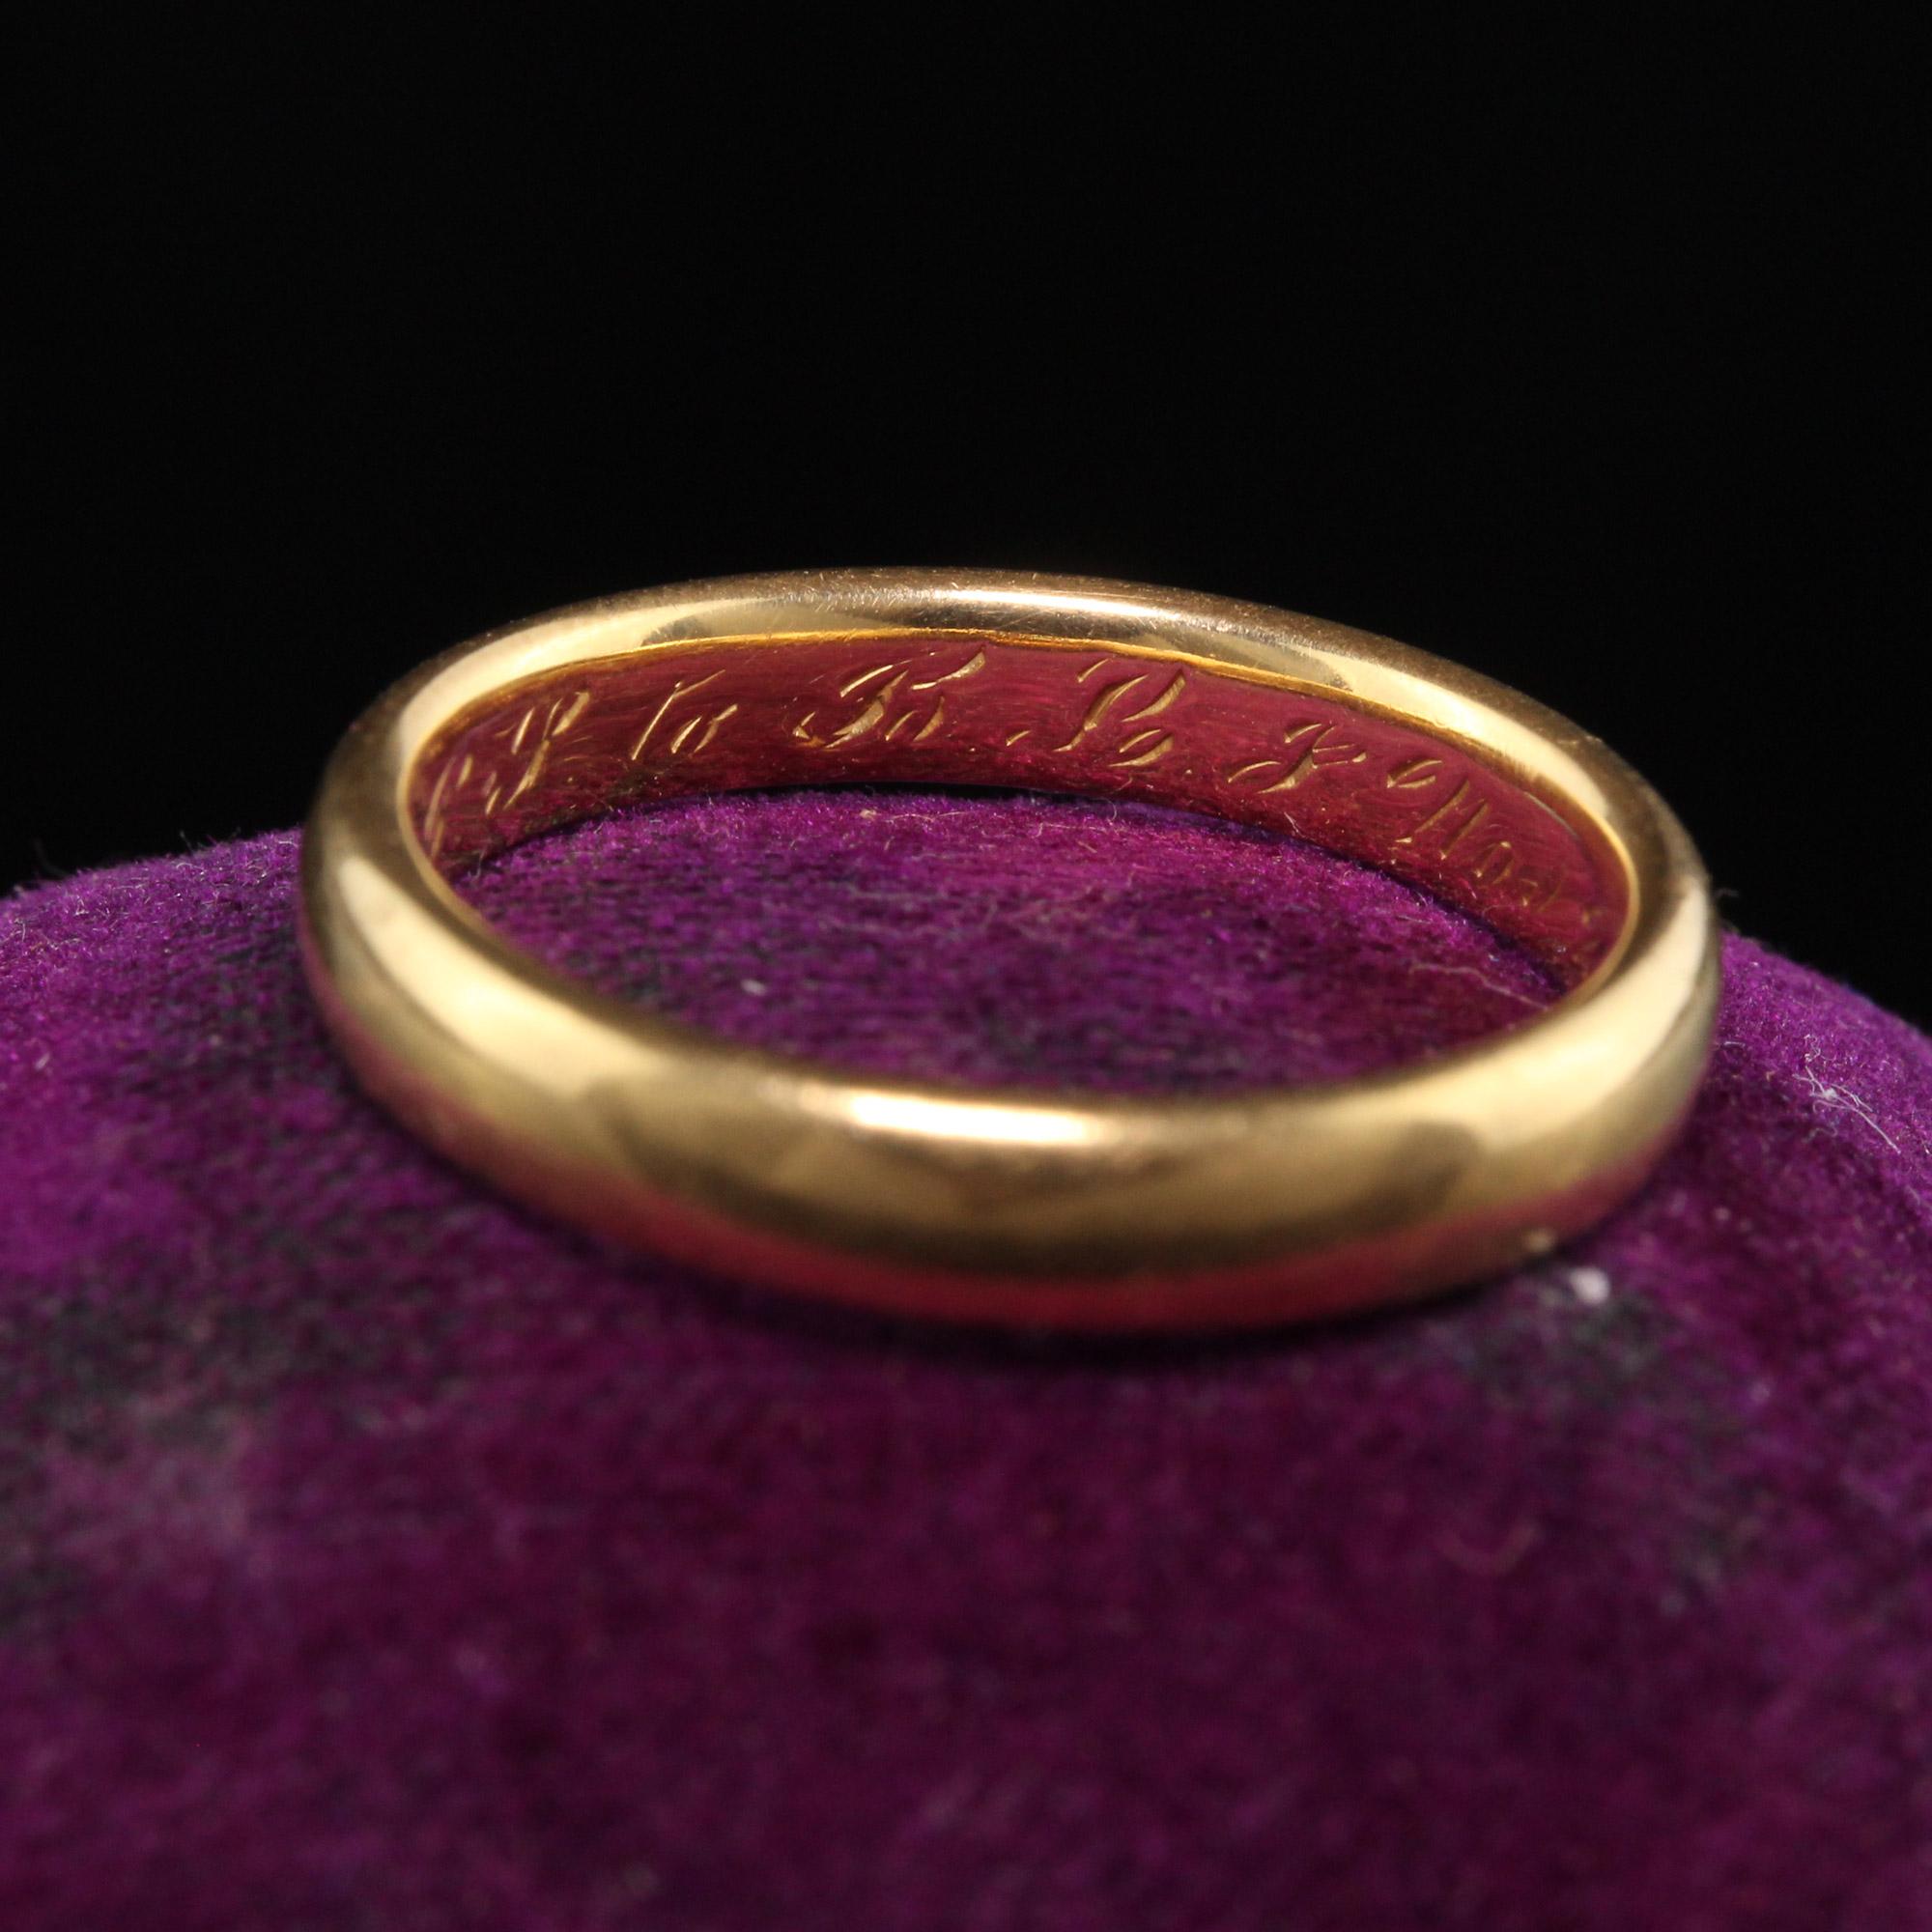 Beautiful Antique Art Deco 18K Yellow Gold Engraved Wedding Band - Size 6 1/2. This classic wedding band is engraved inside the ring P. J. to B. L. F. Nov 29, 1916